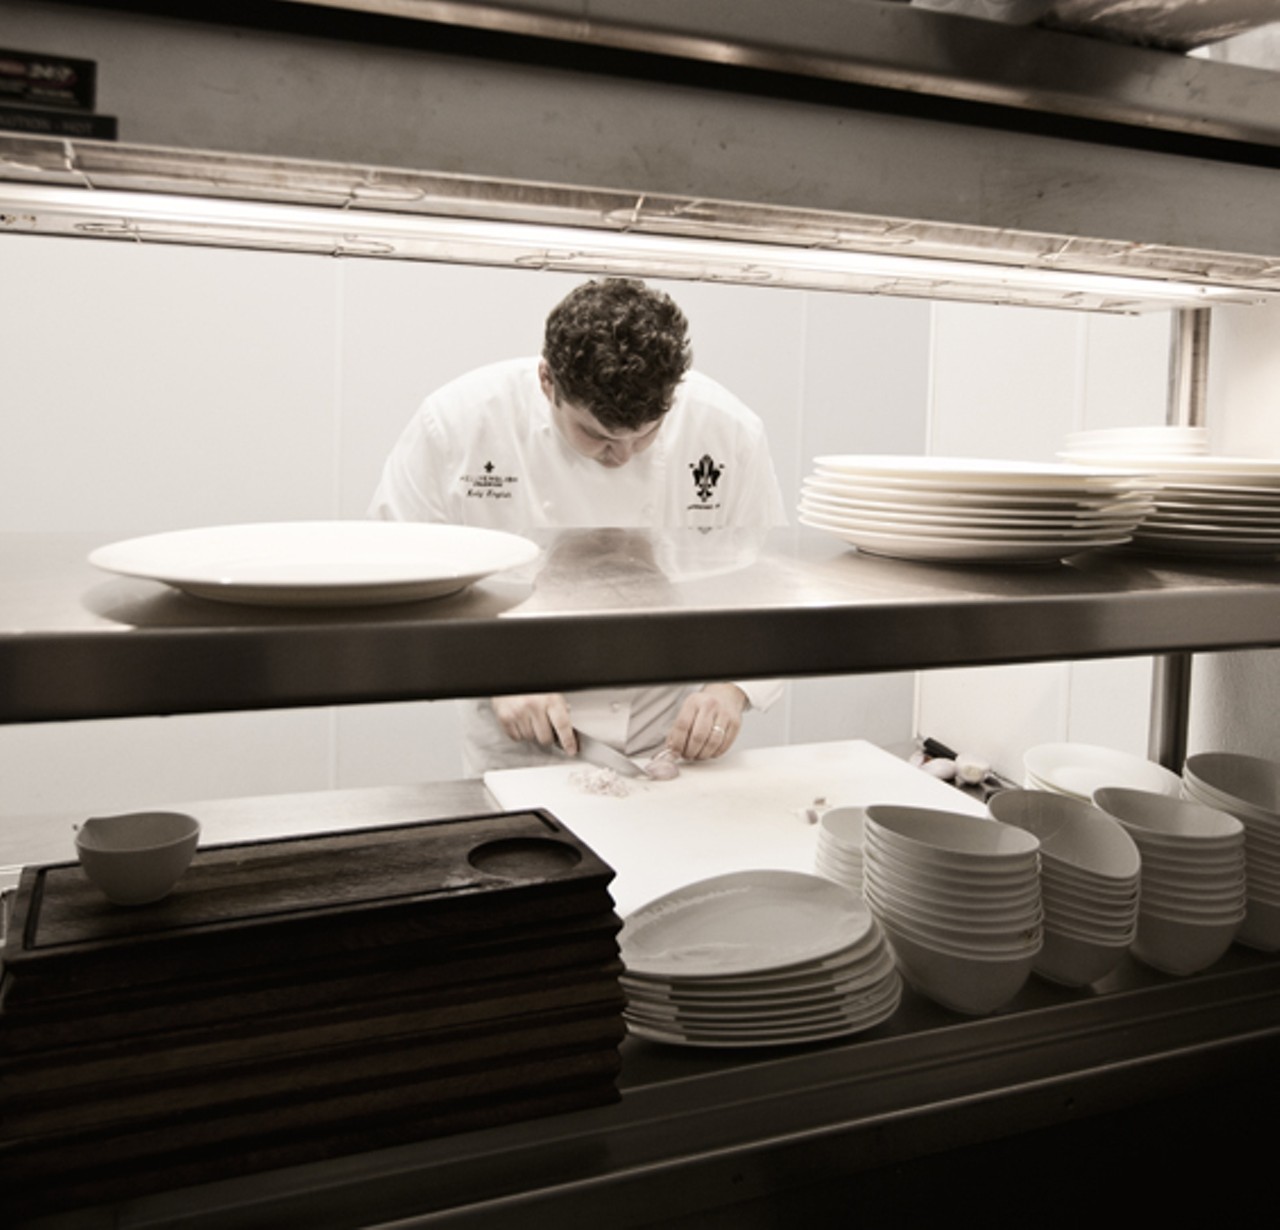 Executive chef Kelly English in the kitchen of the restaurant's St. Louis location at Harrah's Casino.